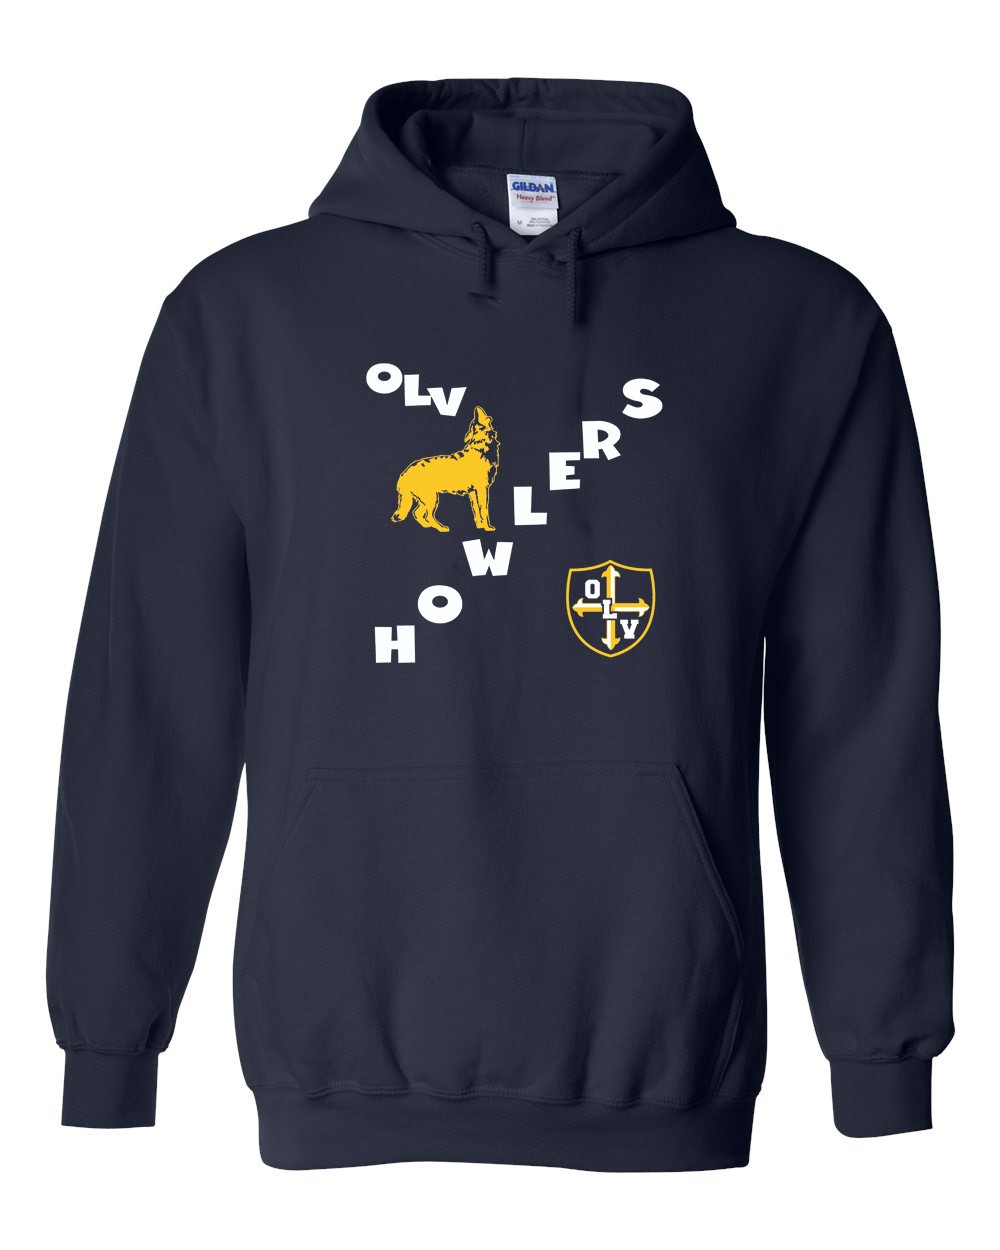 OLV Spirit Pullover Hoodie w/ Howler Logo - Please Allow 2-3 Weeks for Delivery